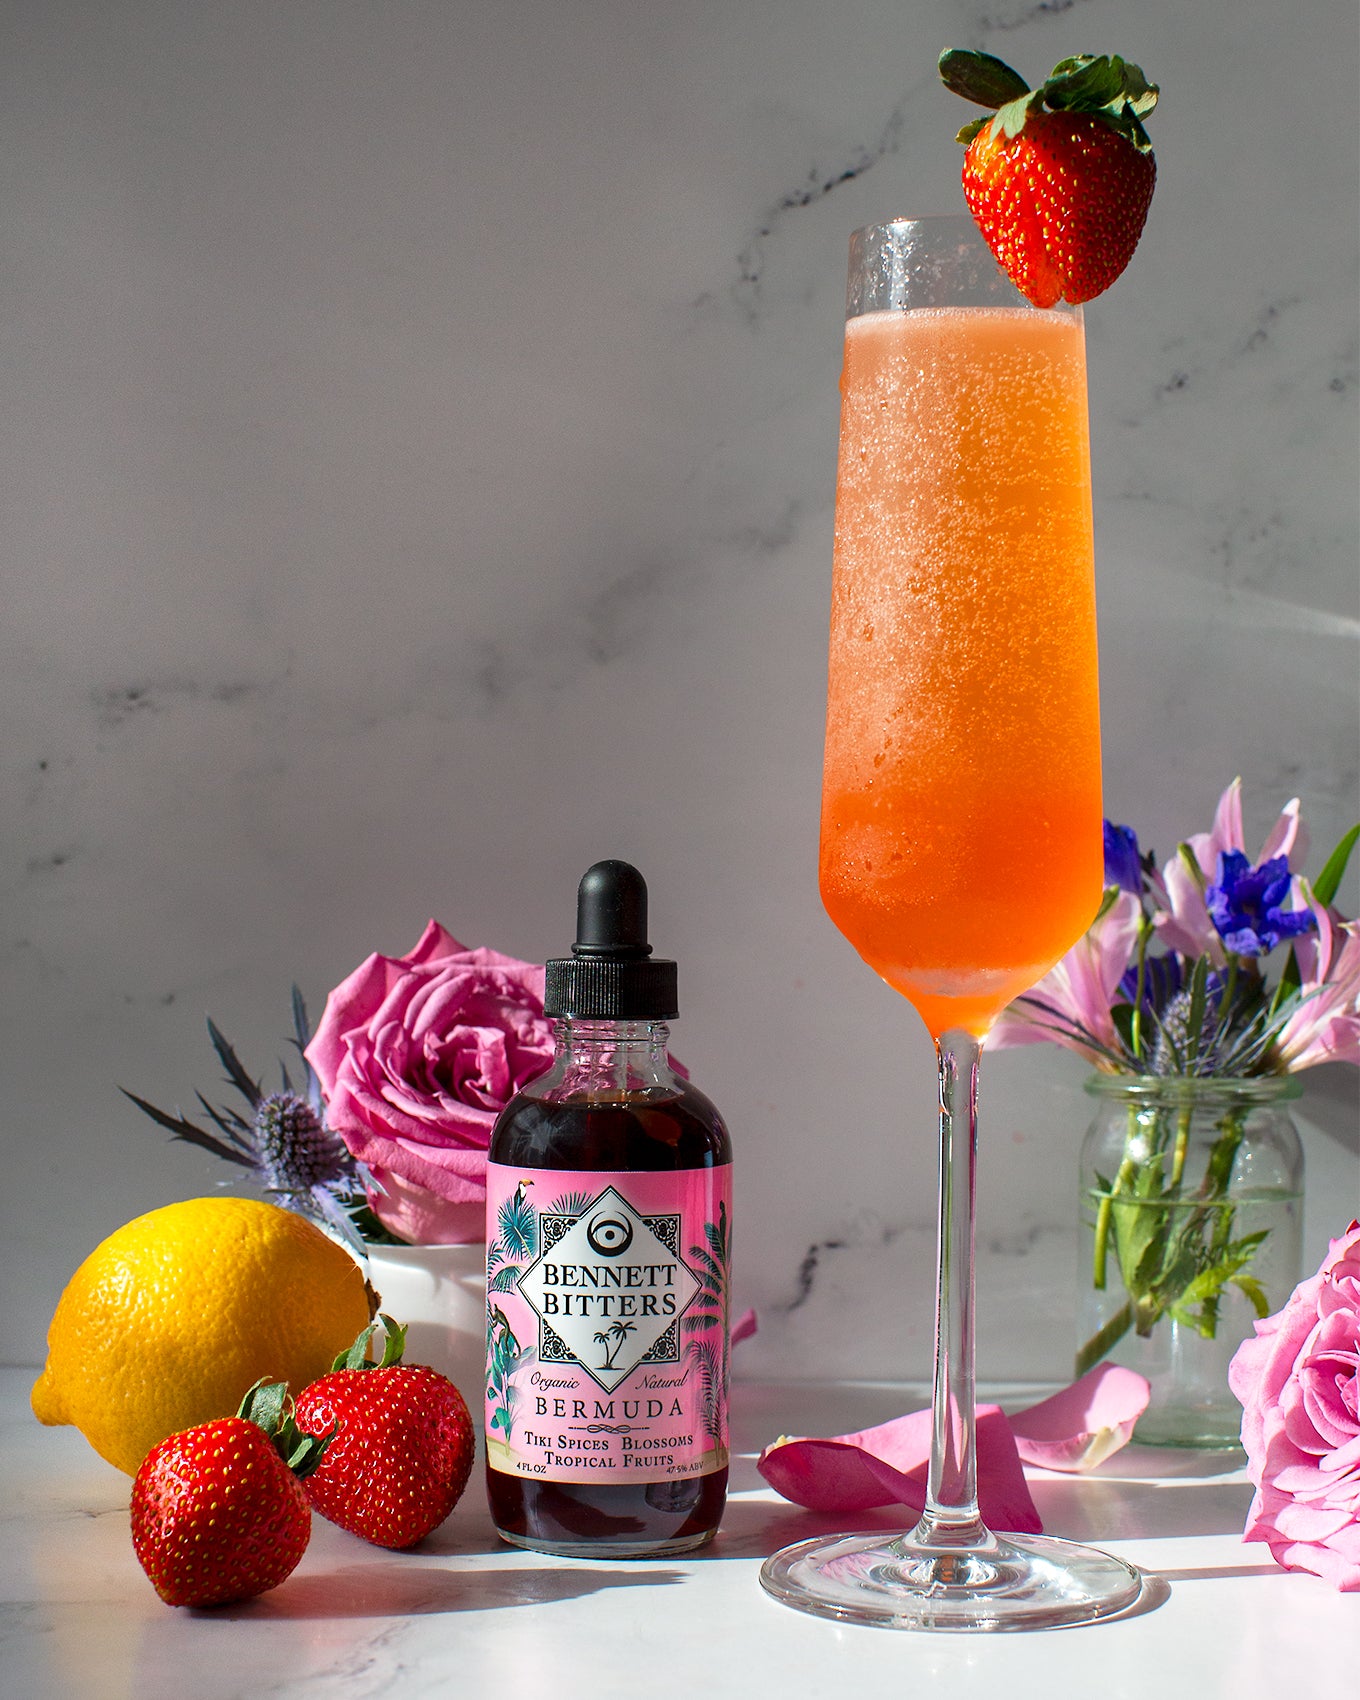 An Ideal Husband strawberry Champagne margarita in a Champagne flute next to a bottle of tropical Bermuda Bitters, a lemon, strawberries, and flowers.